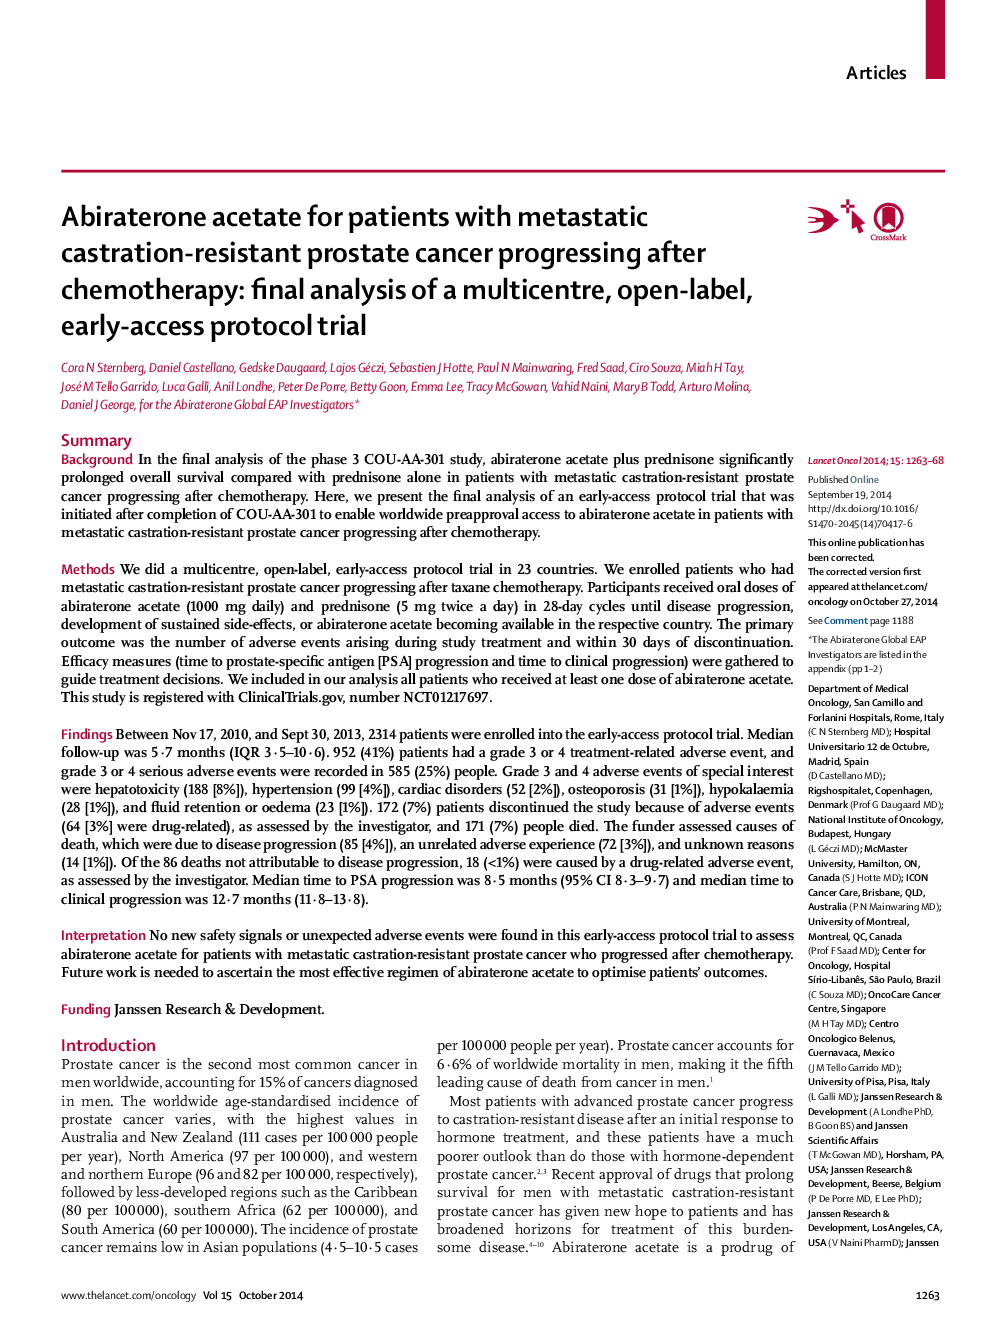 Abiraterone acetate for patients with metastatic castration-resistant prostate cancer progressing after chemotherapy: final analysis of a multicentre, open-label, early-access protocol trial